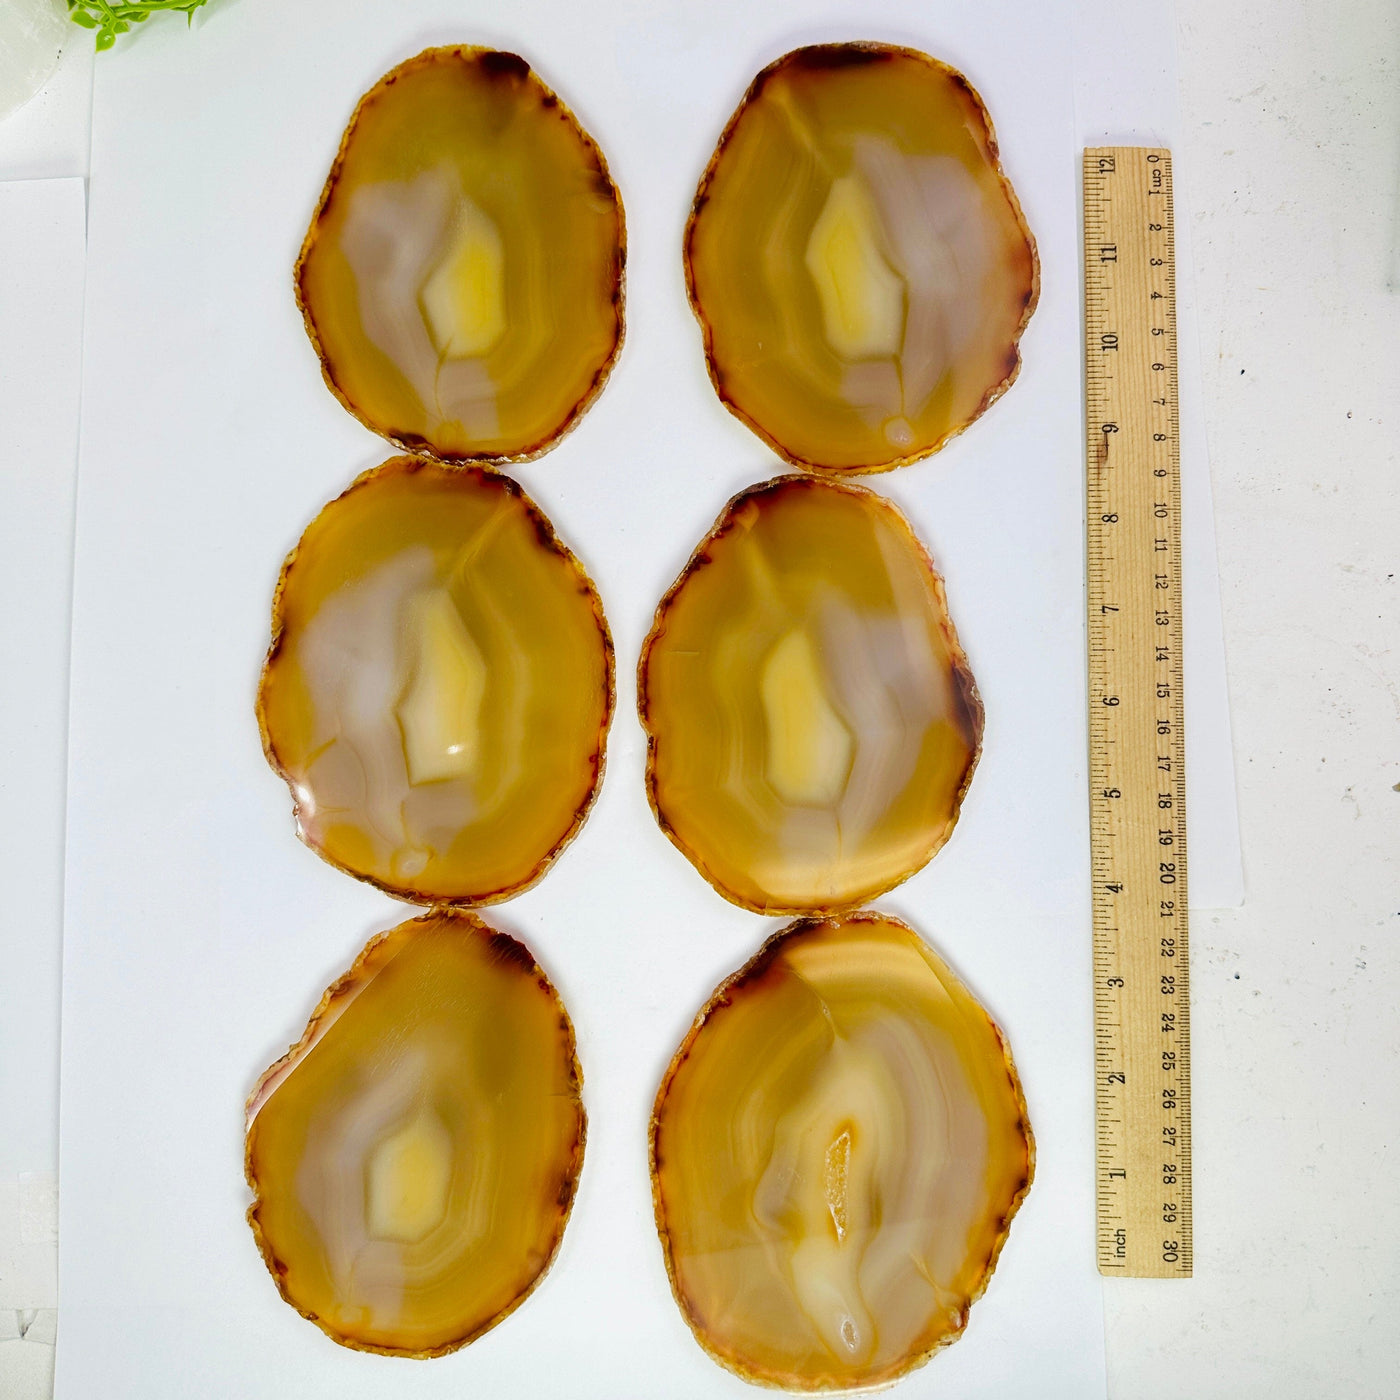 Iris Agate Slice Set - Six Agate Crystal Slices with ruler for size reference